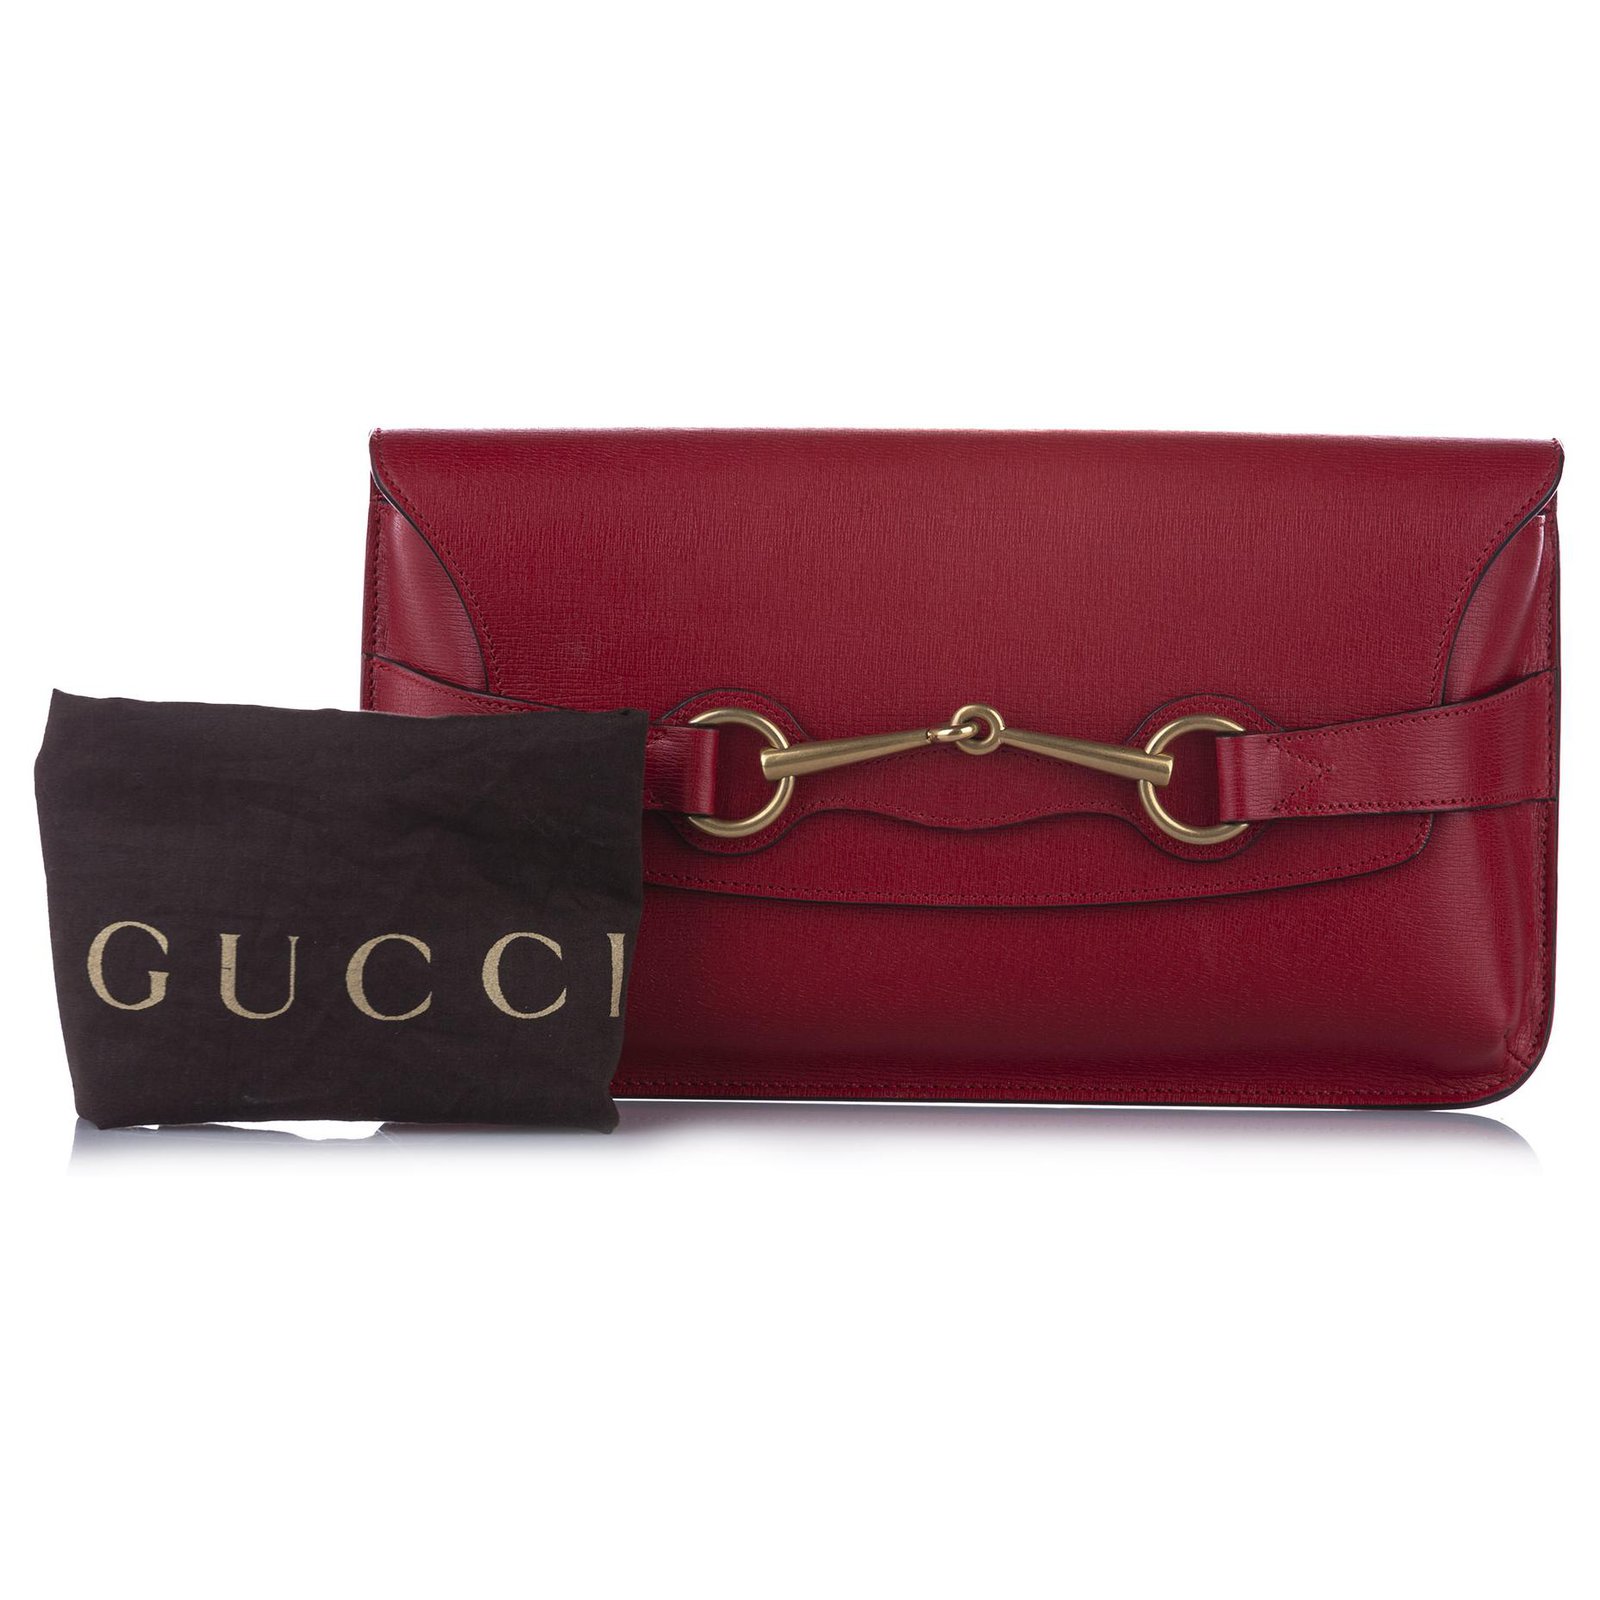 gucci red leather clutch